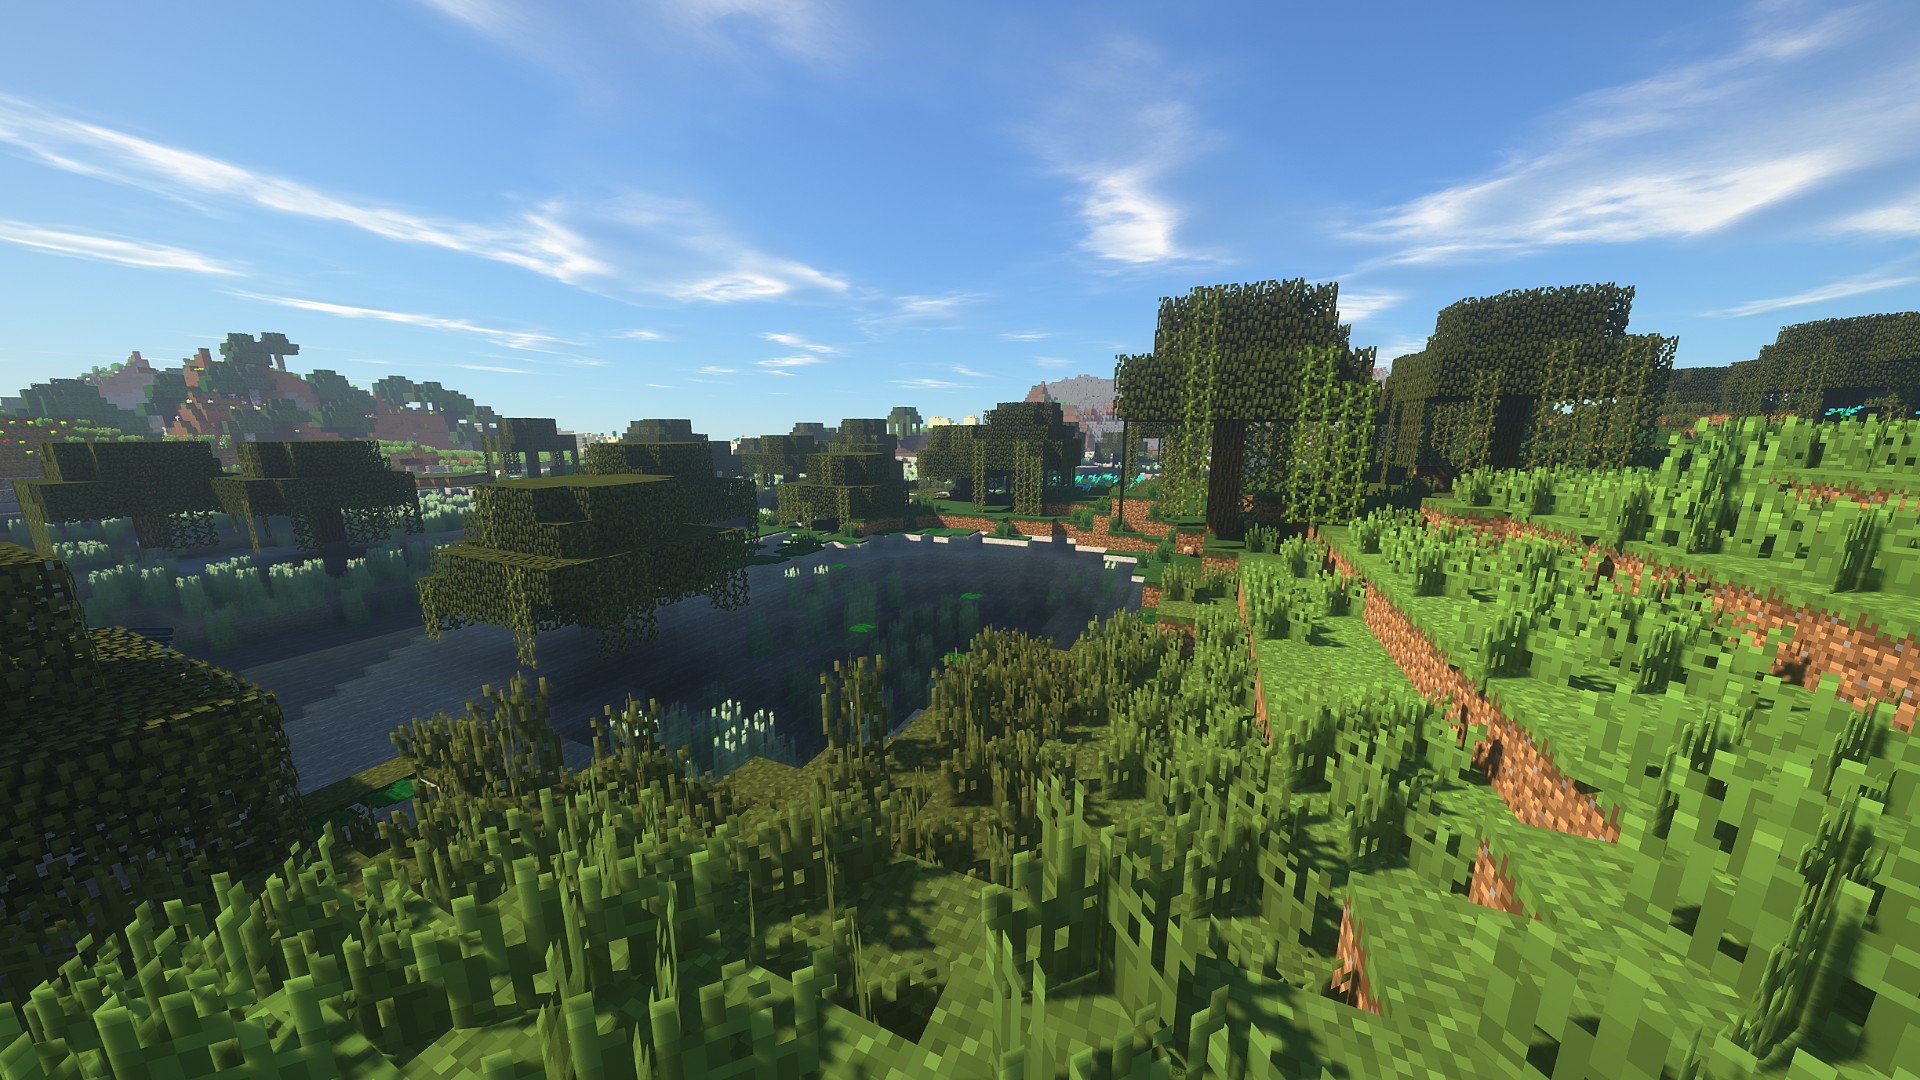 Minecraft servers are at risk from this vulnerability, but you can fix it